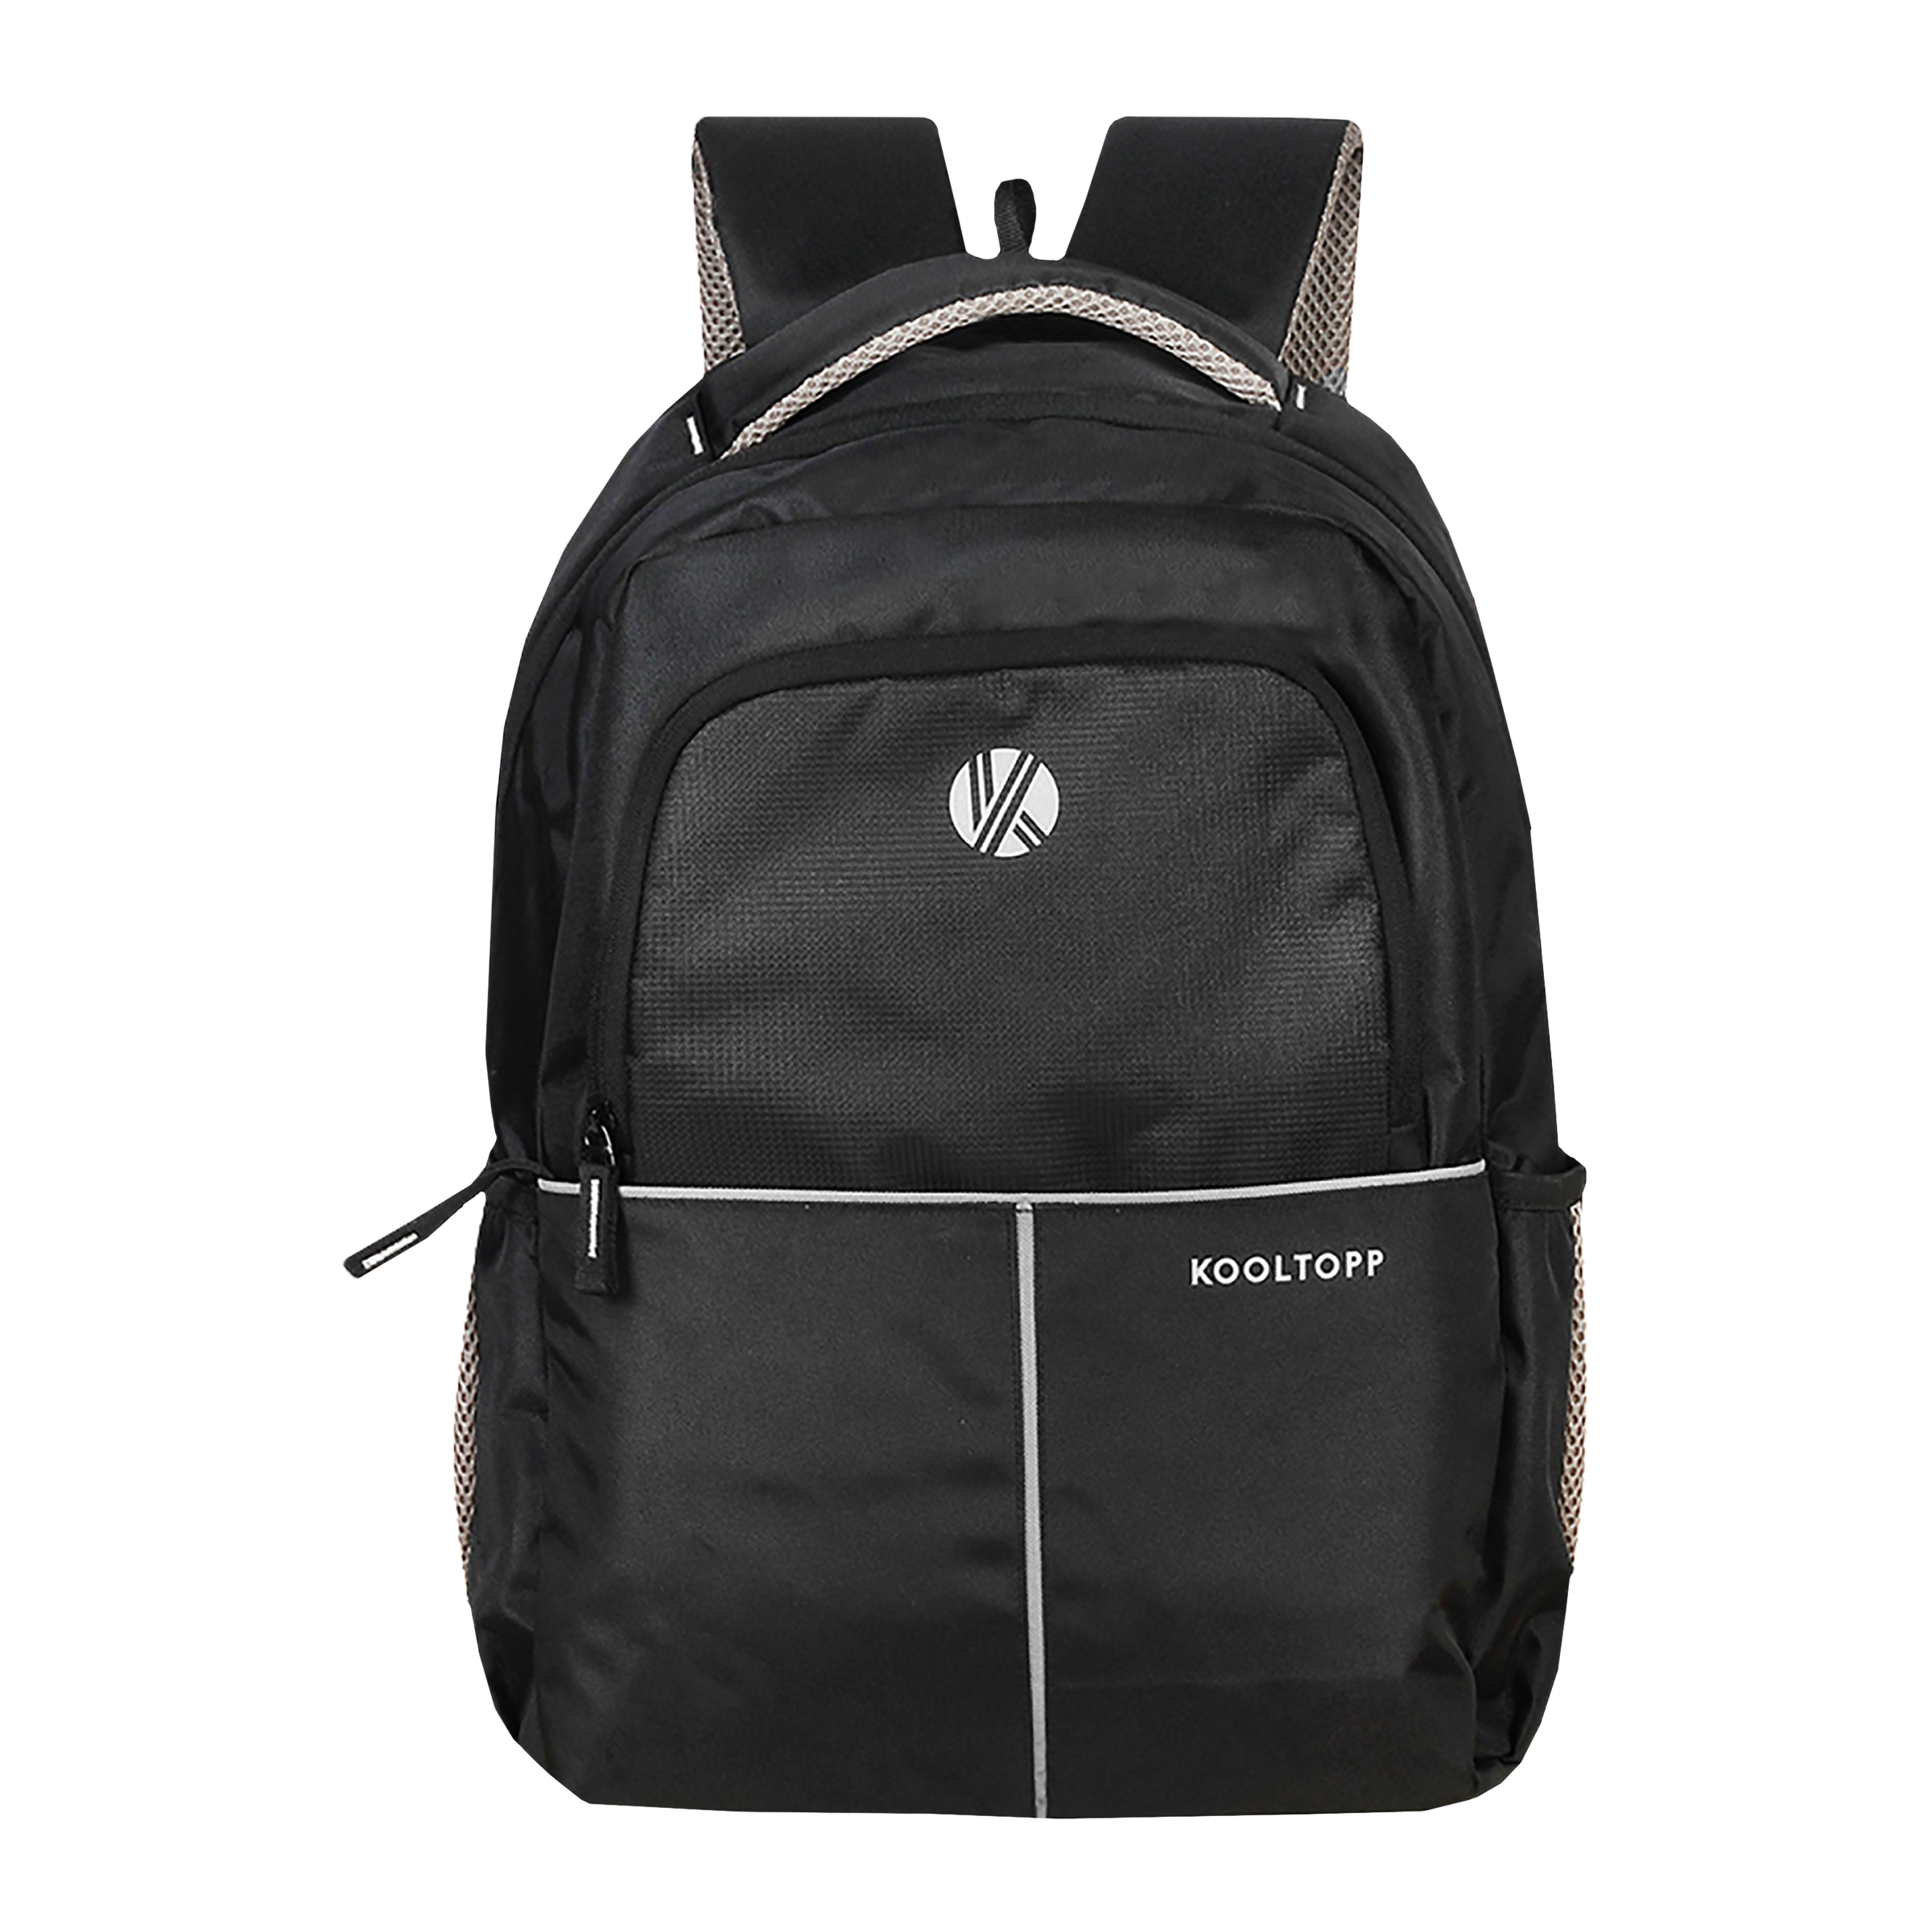 Vanguard Xcenior 41t Bag Black [0X90629] in Pune at best price by Croma -  Justdial